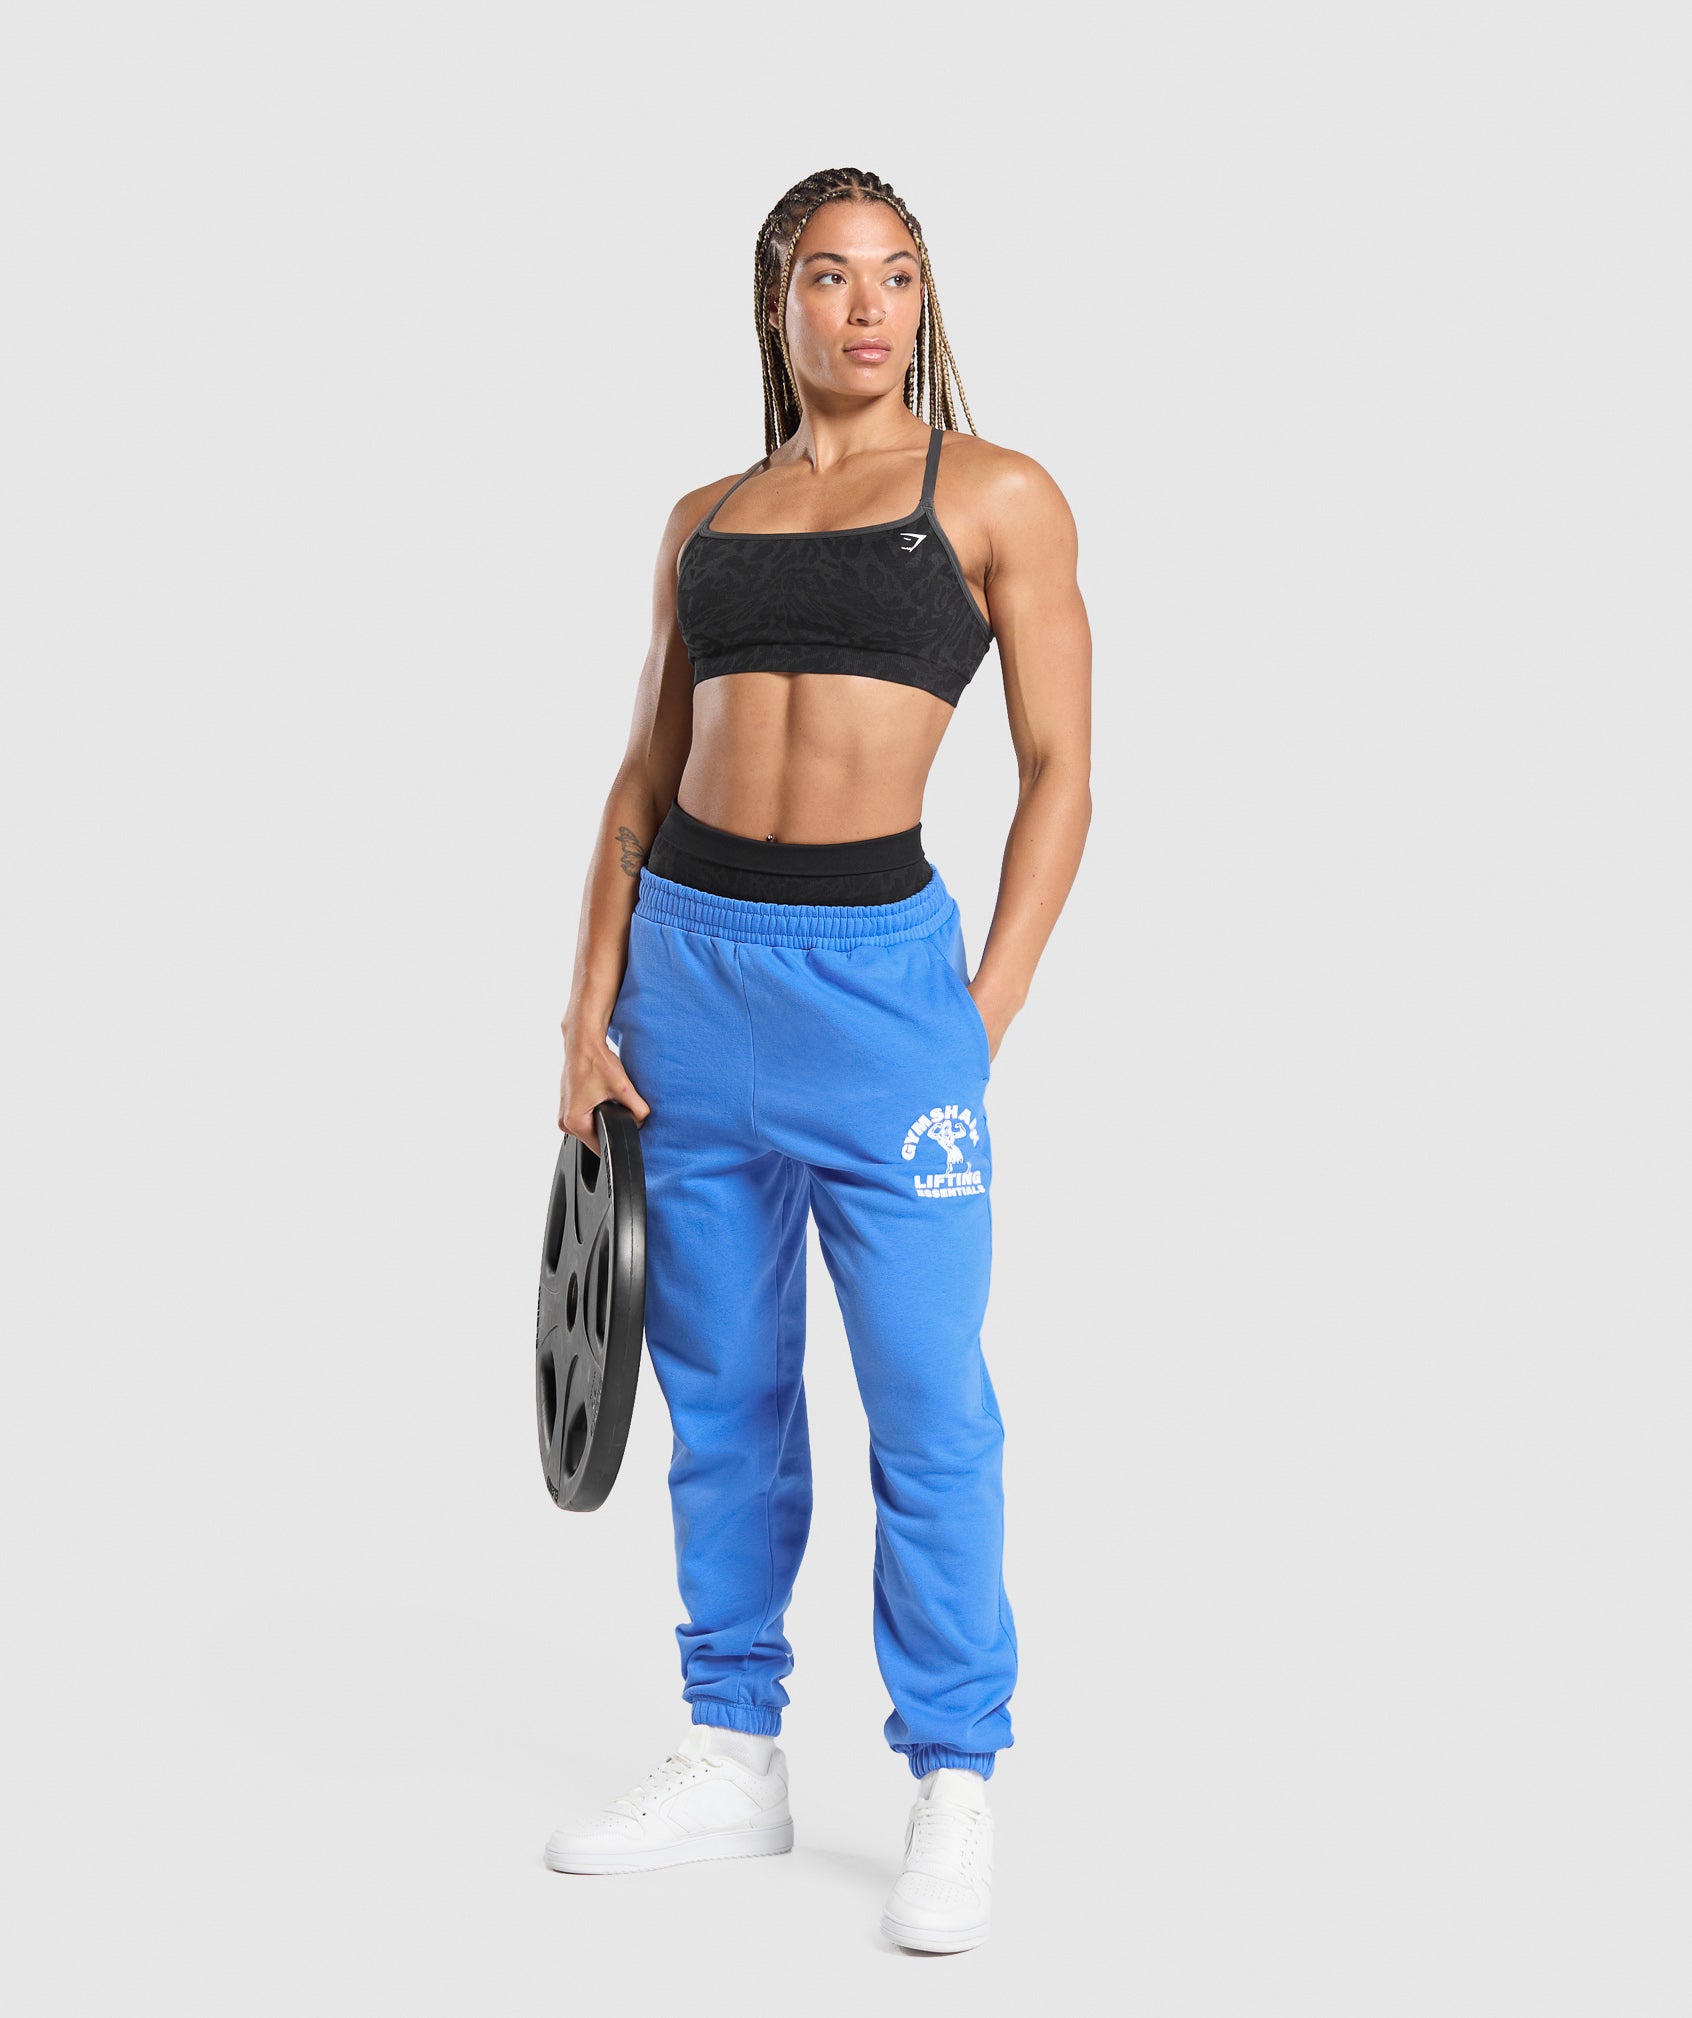 Strong Women Joggers in Lats Blue - view 4